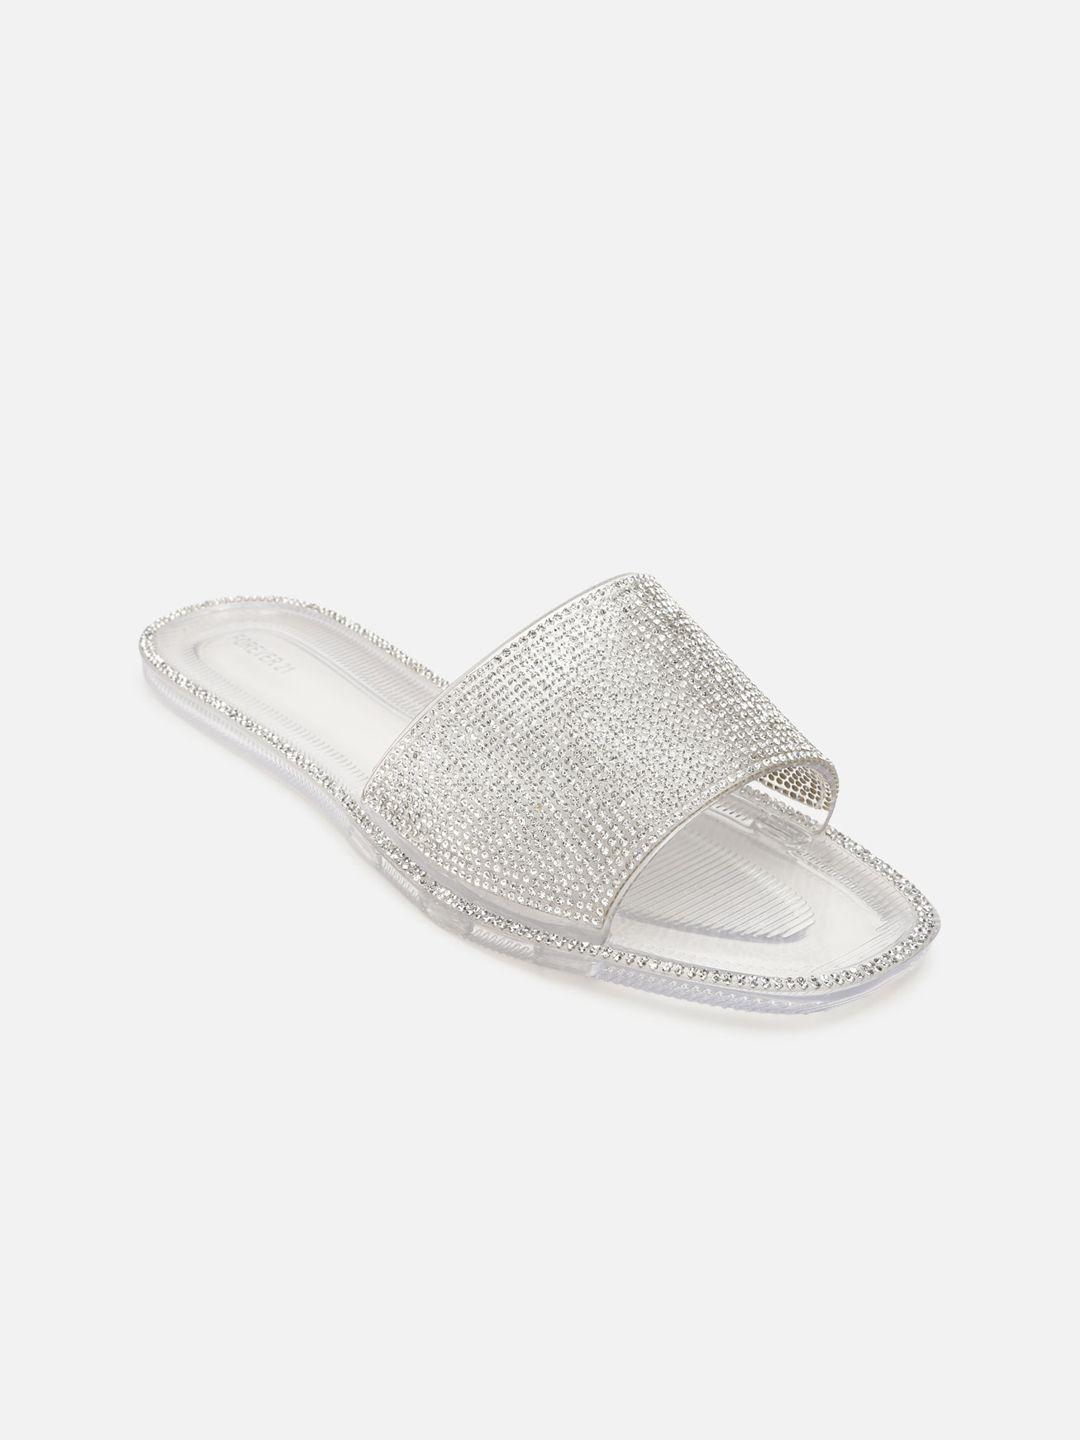 forever-21-women-silver-toned-textured-flats